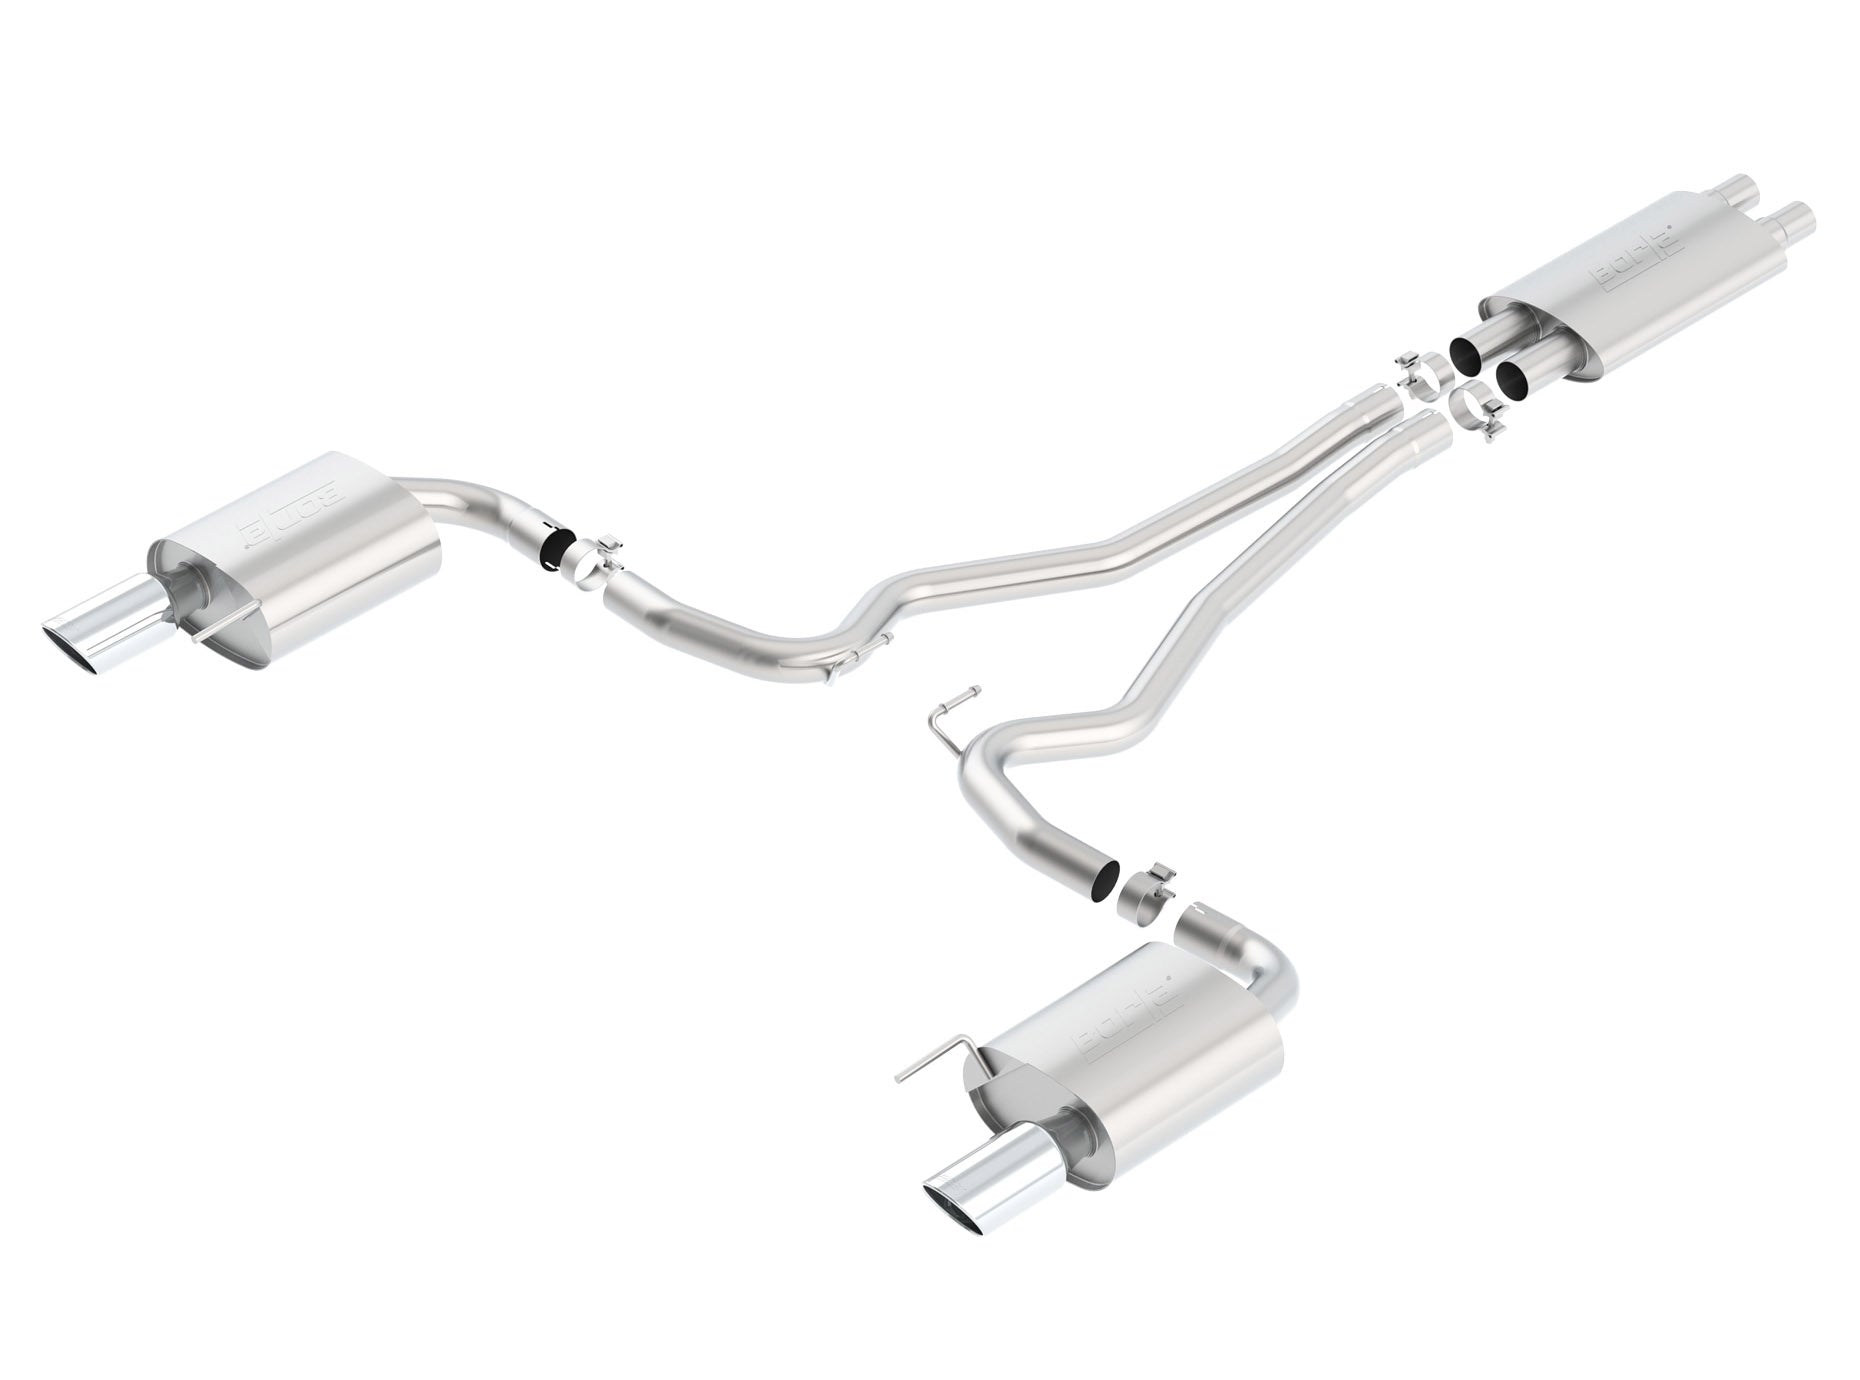 BORLA 140589 Cat Back Exhaust System, Mustang GT V8-5.0L, Tip №36, 2015-16, sound Touring Photo-1 